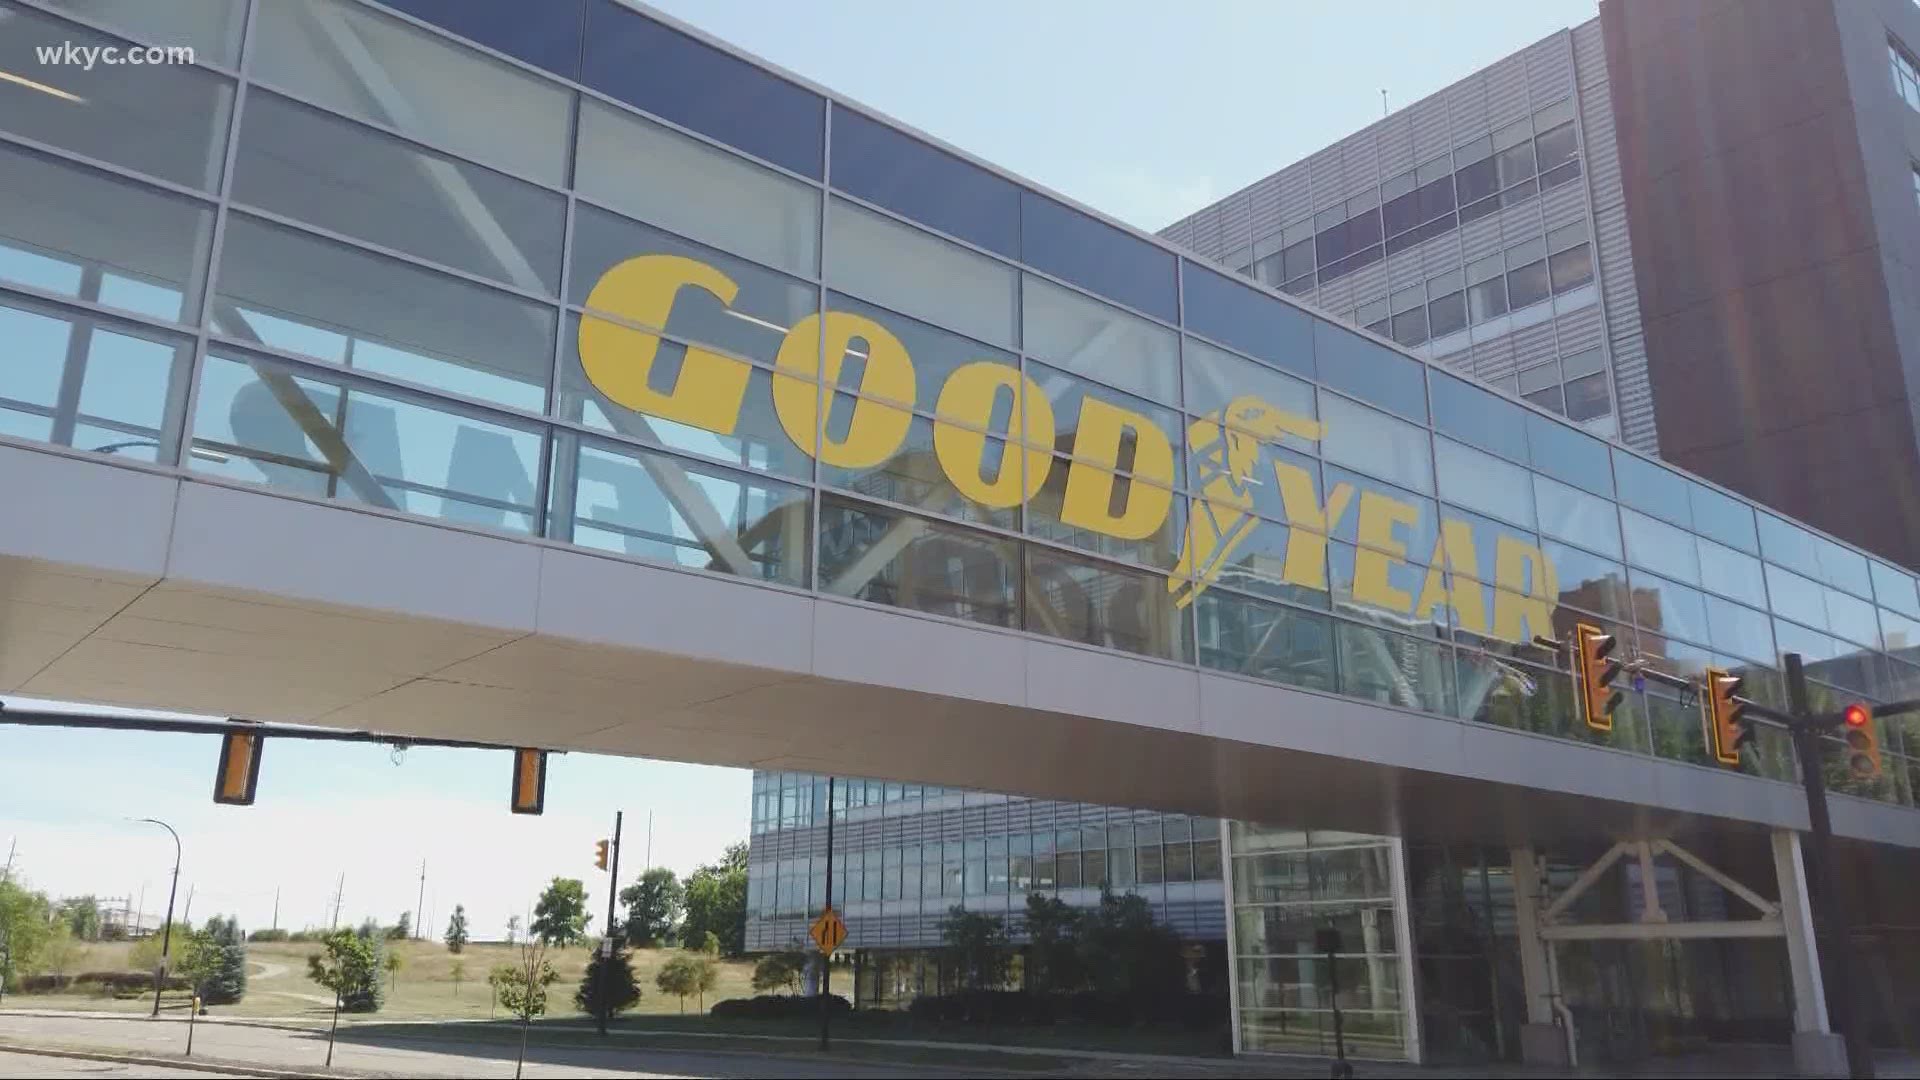 Goodyear workers are fighting back after President Trump calls for a boycott of the Akron based tire company. Brandon Simmons takes us inside their rally.